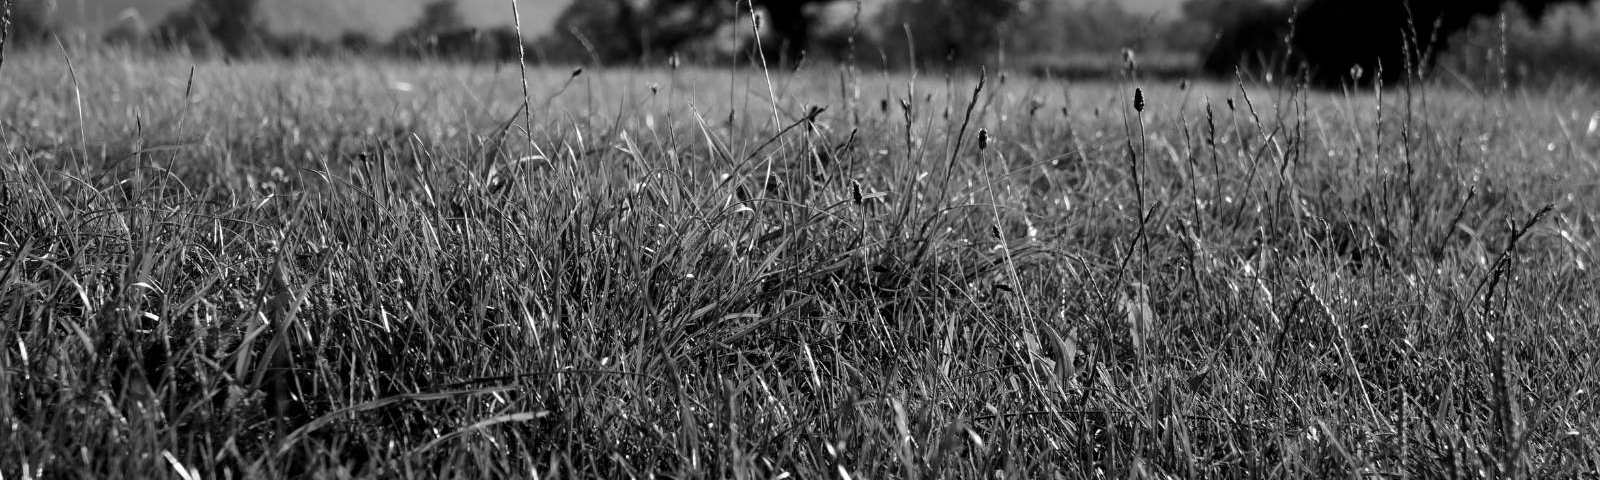 Black and white photo of a meadow with a tree in the background.